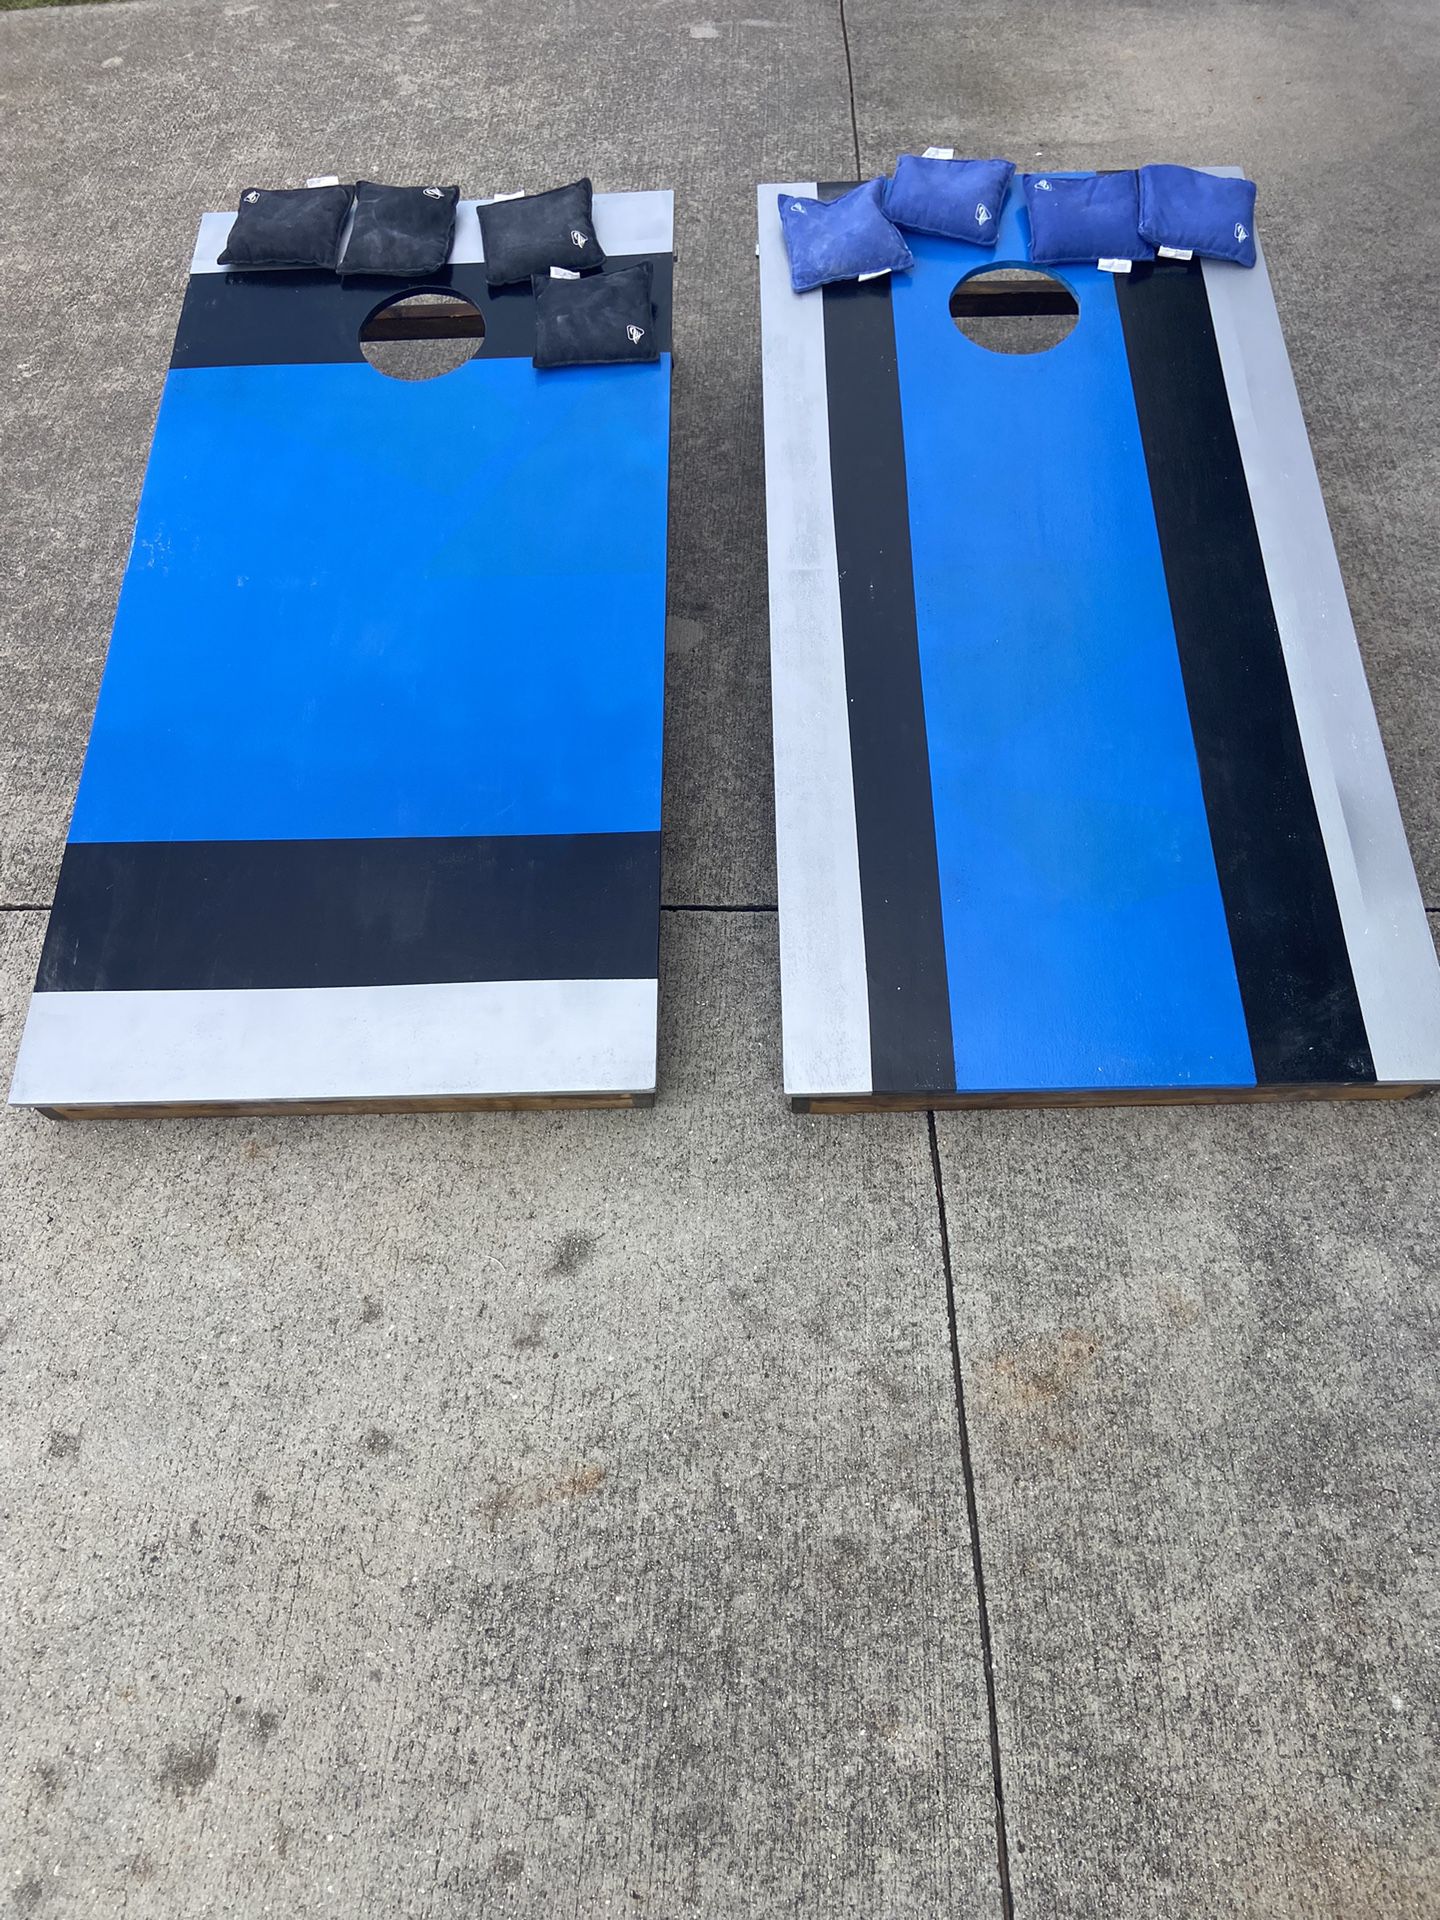 Official Size Corn Hole Boards And Bags